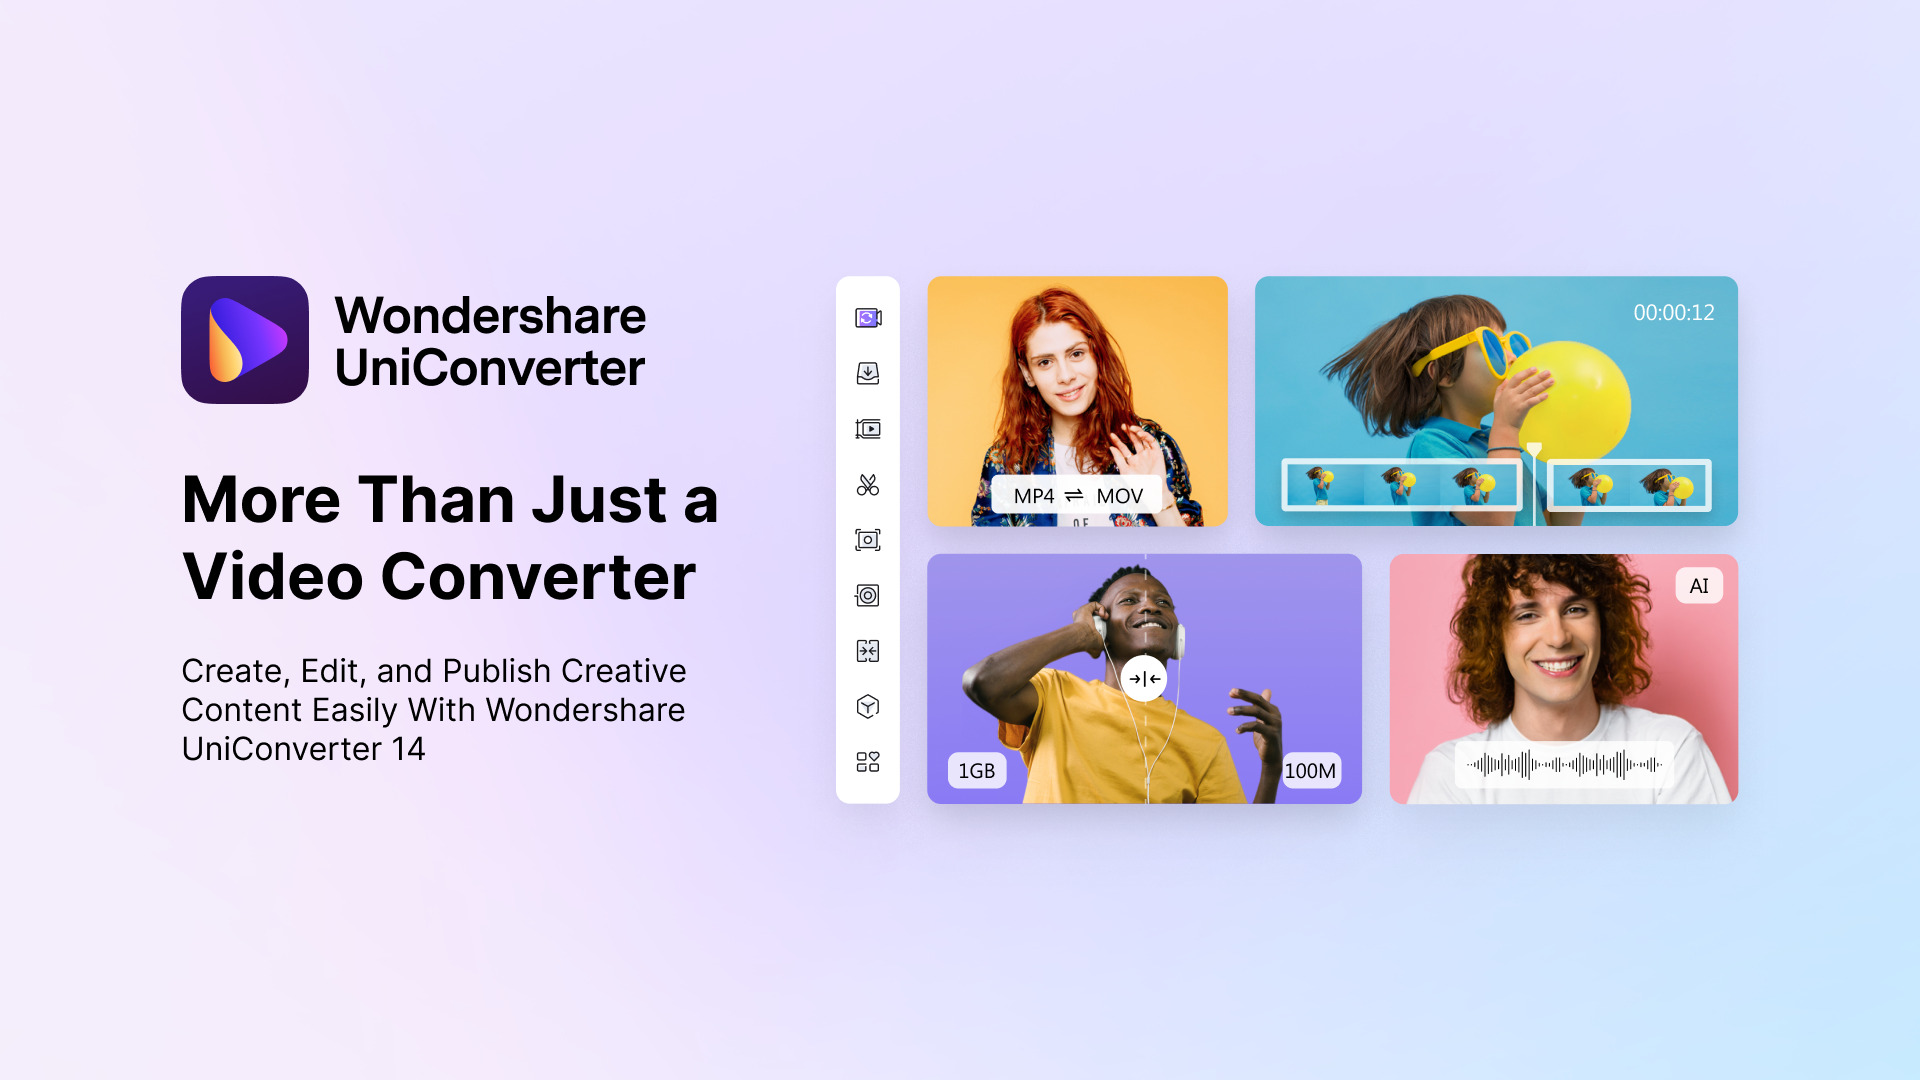 Why Wondershare Uniconverter 14 Is a One-in-All Multimedia Tool